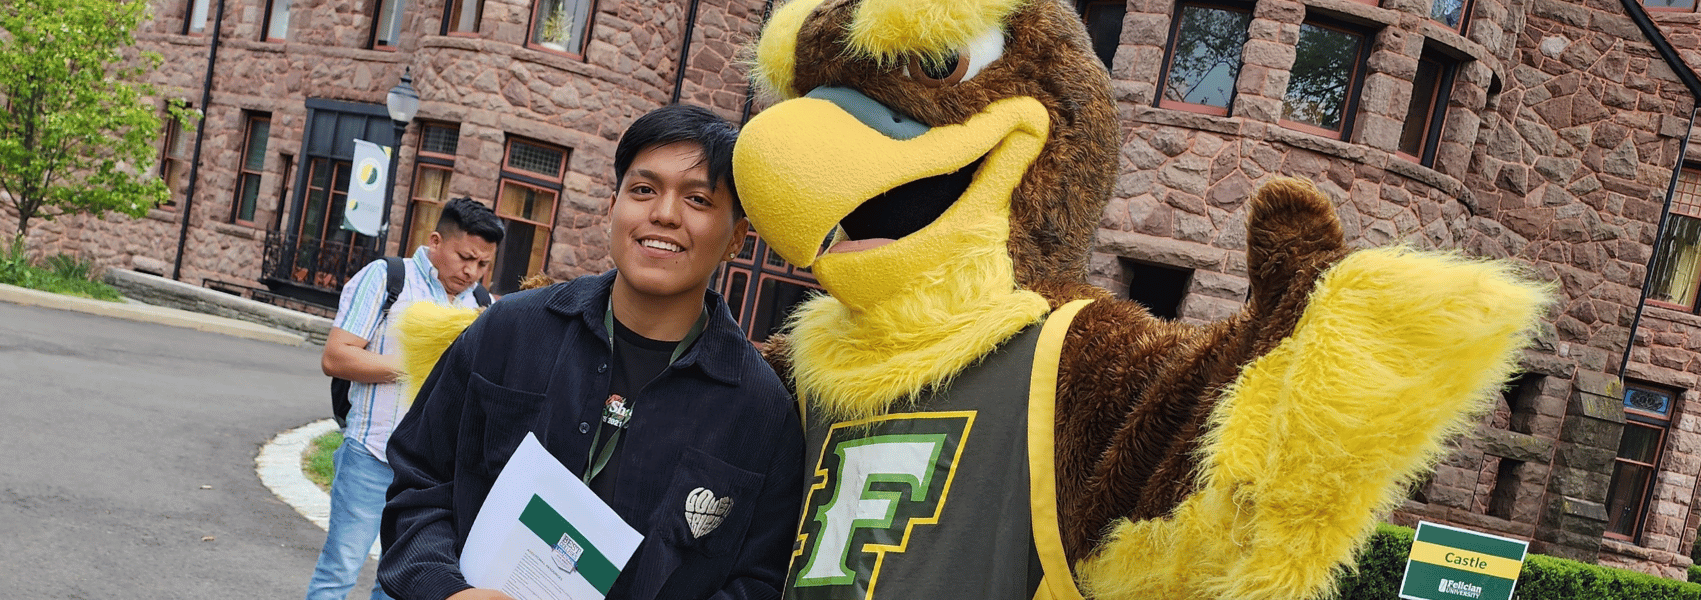 Franke with a student outside of the castle on the Rutherford campus